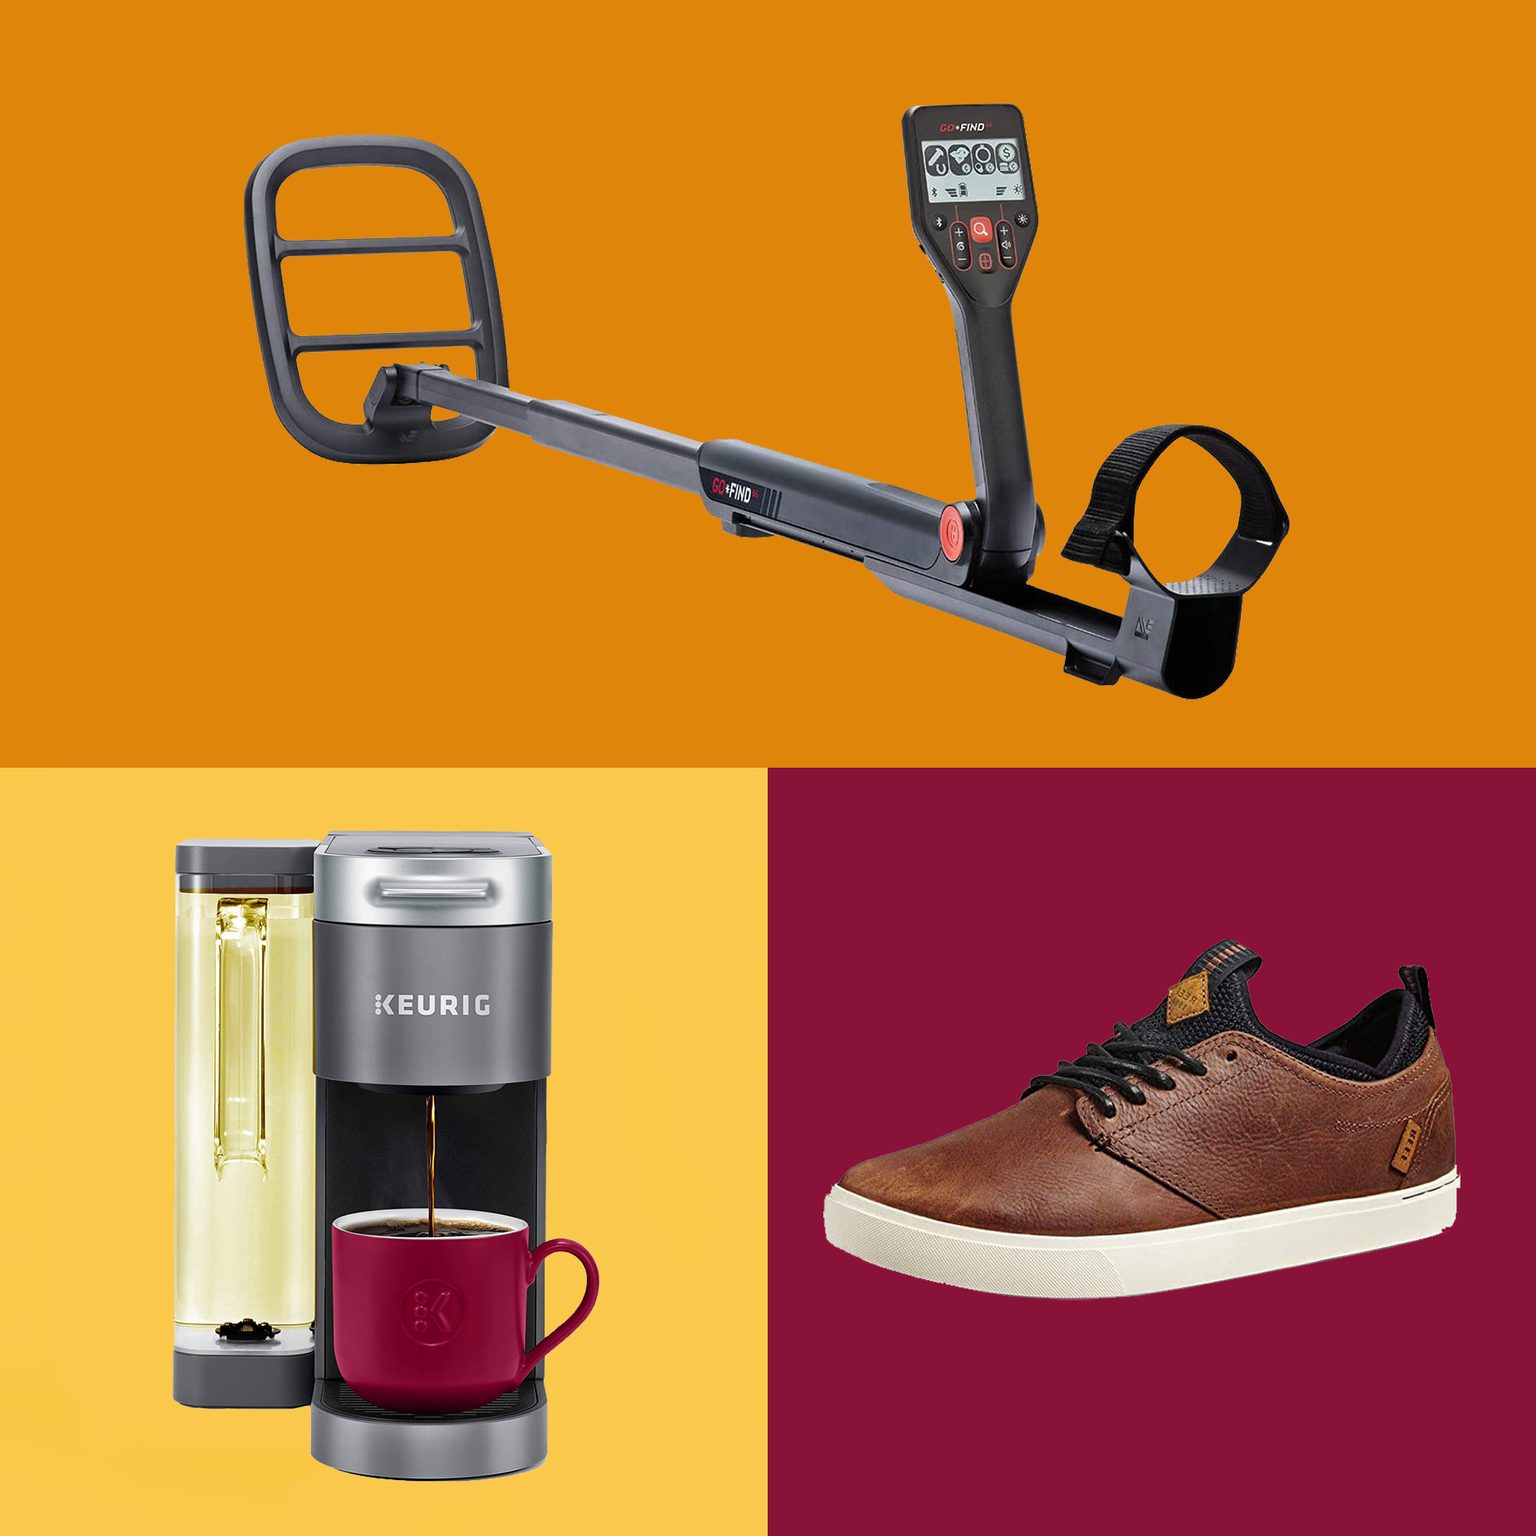 Download 30 Best Father's Day Gifts for Grandpa 2021 | Reader's Digest